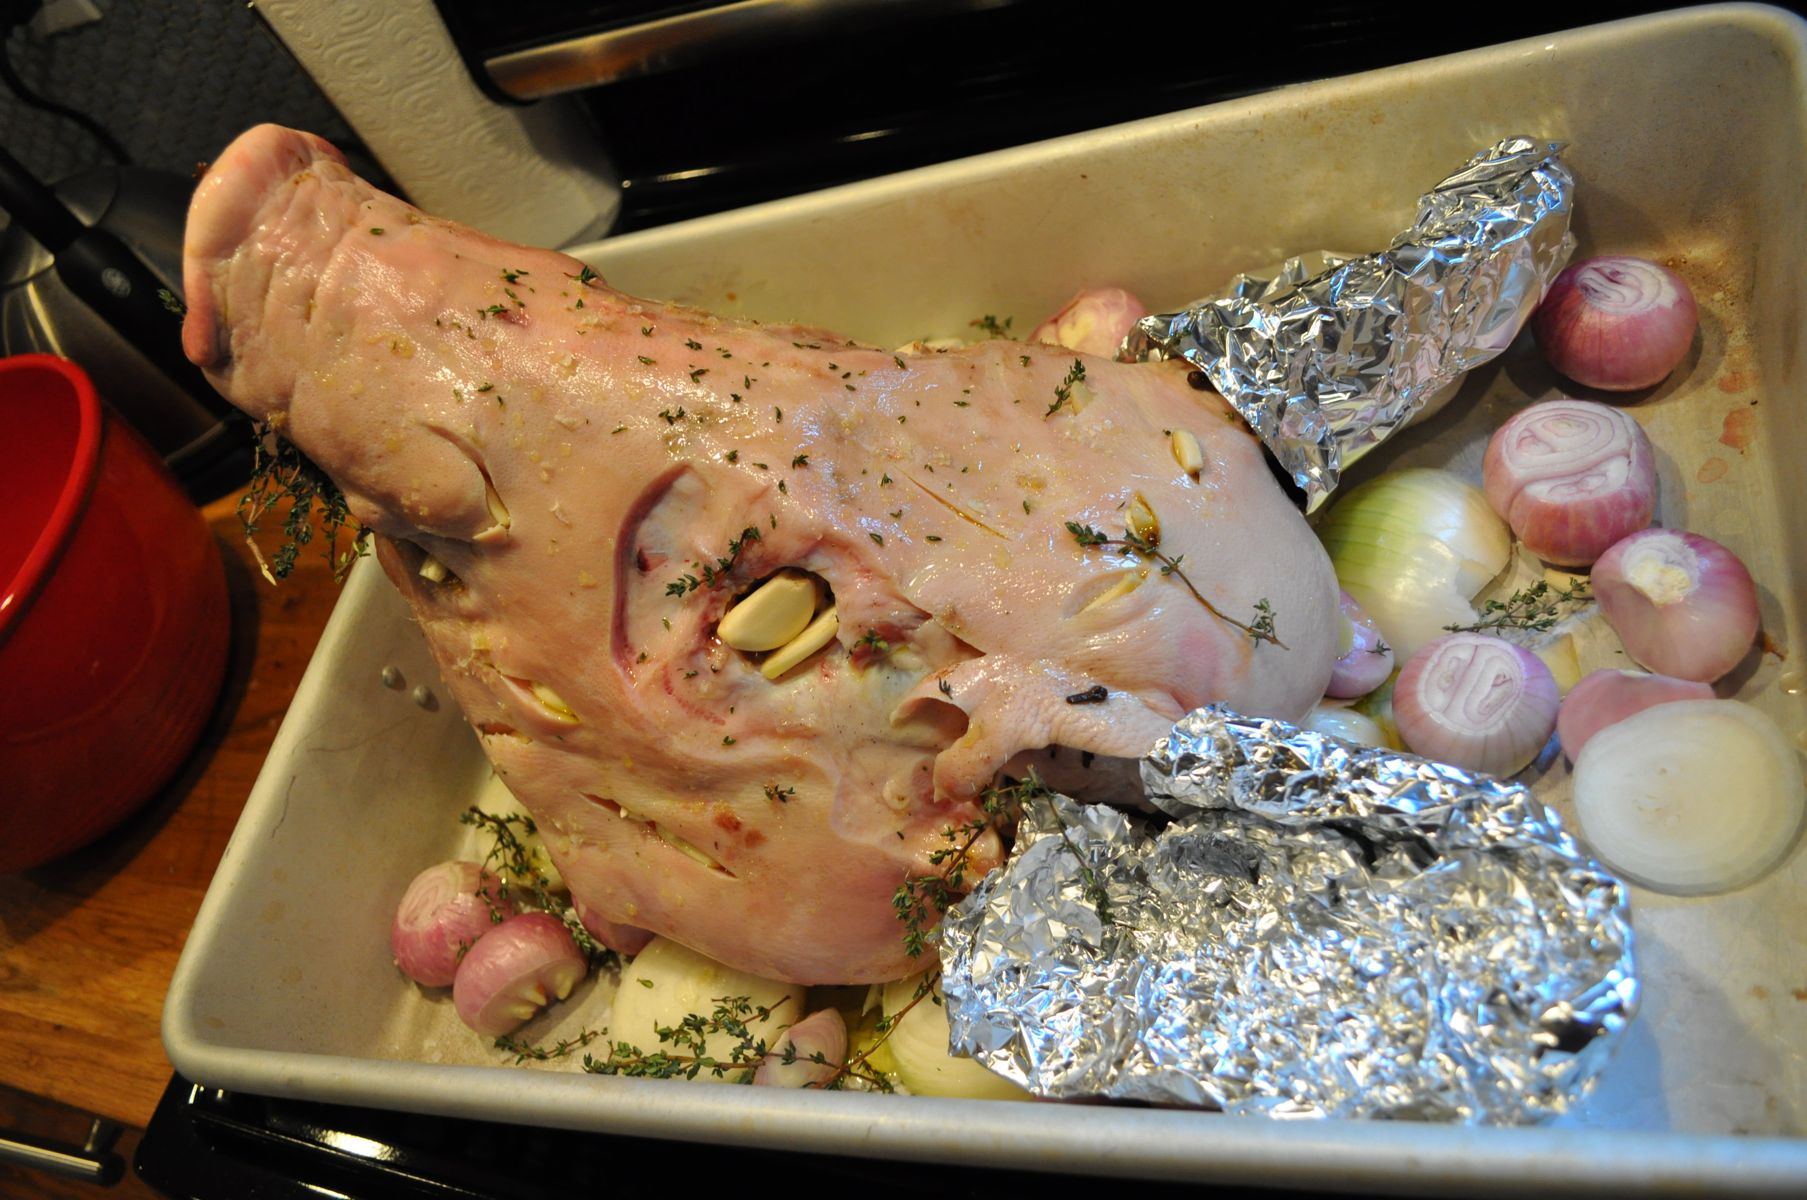 Then we covered her ears in tin foil to stop them from burning in the oven, and put garlic and cloves into the slits made in her skin so the brine cou